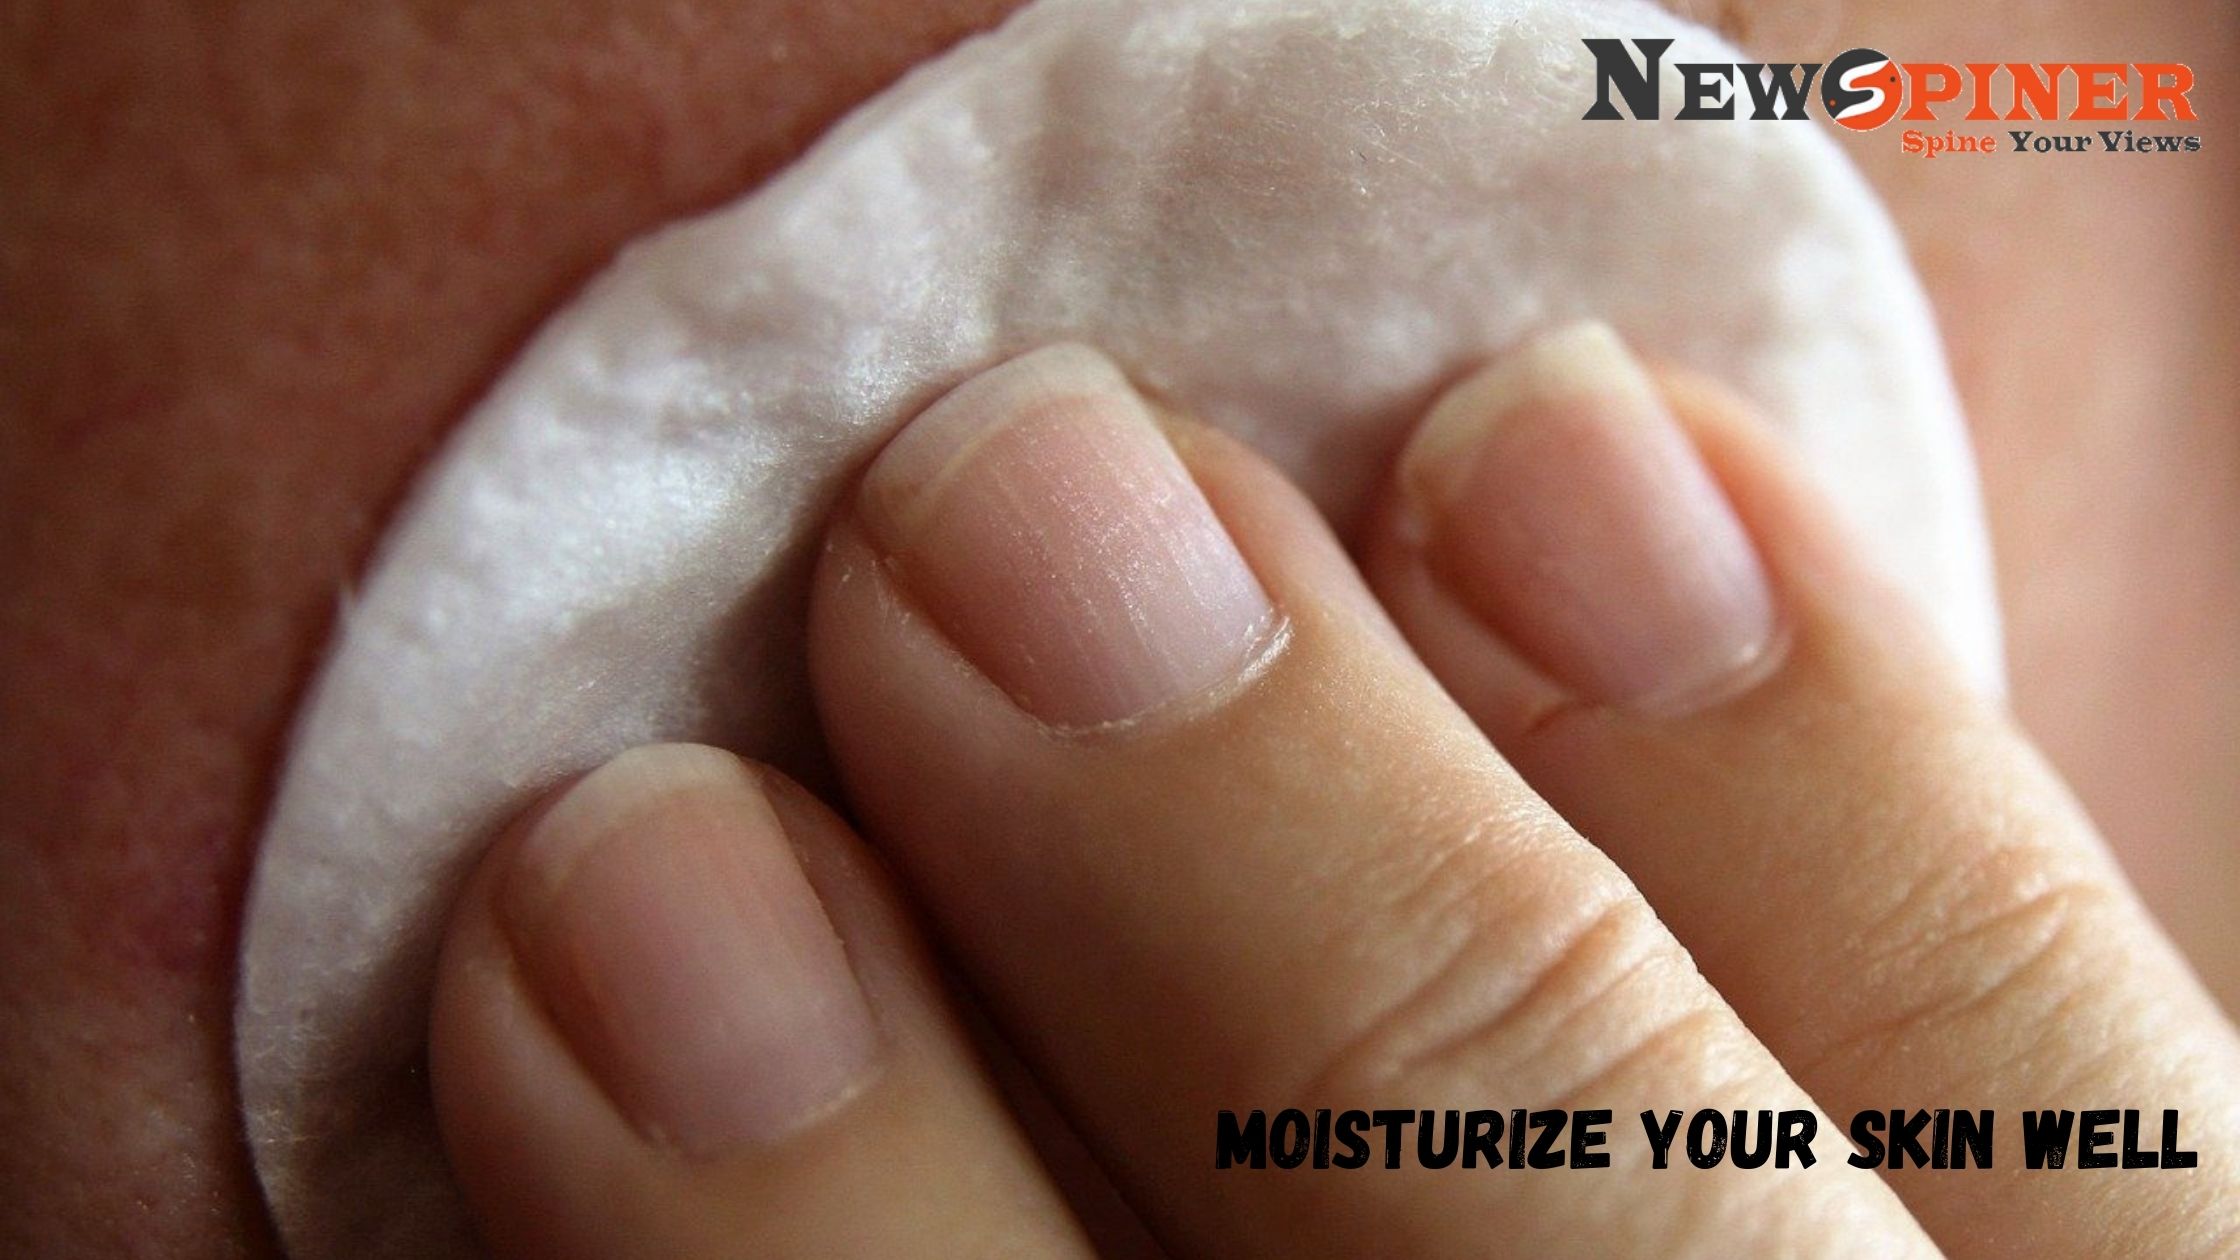 Moisturize your skin well